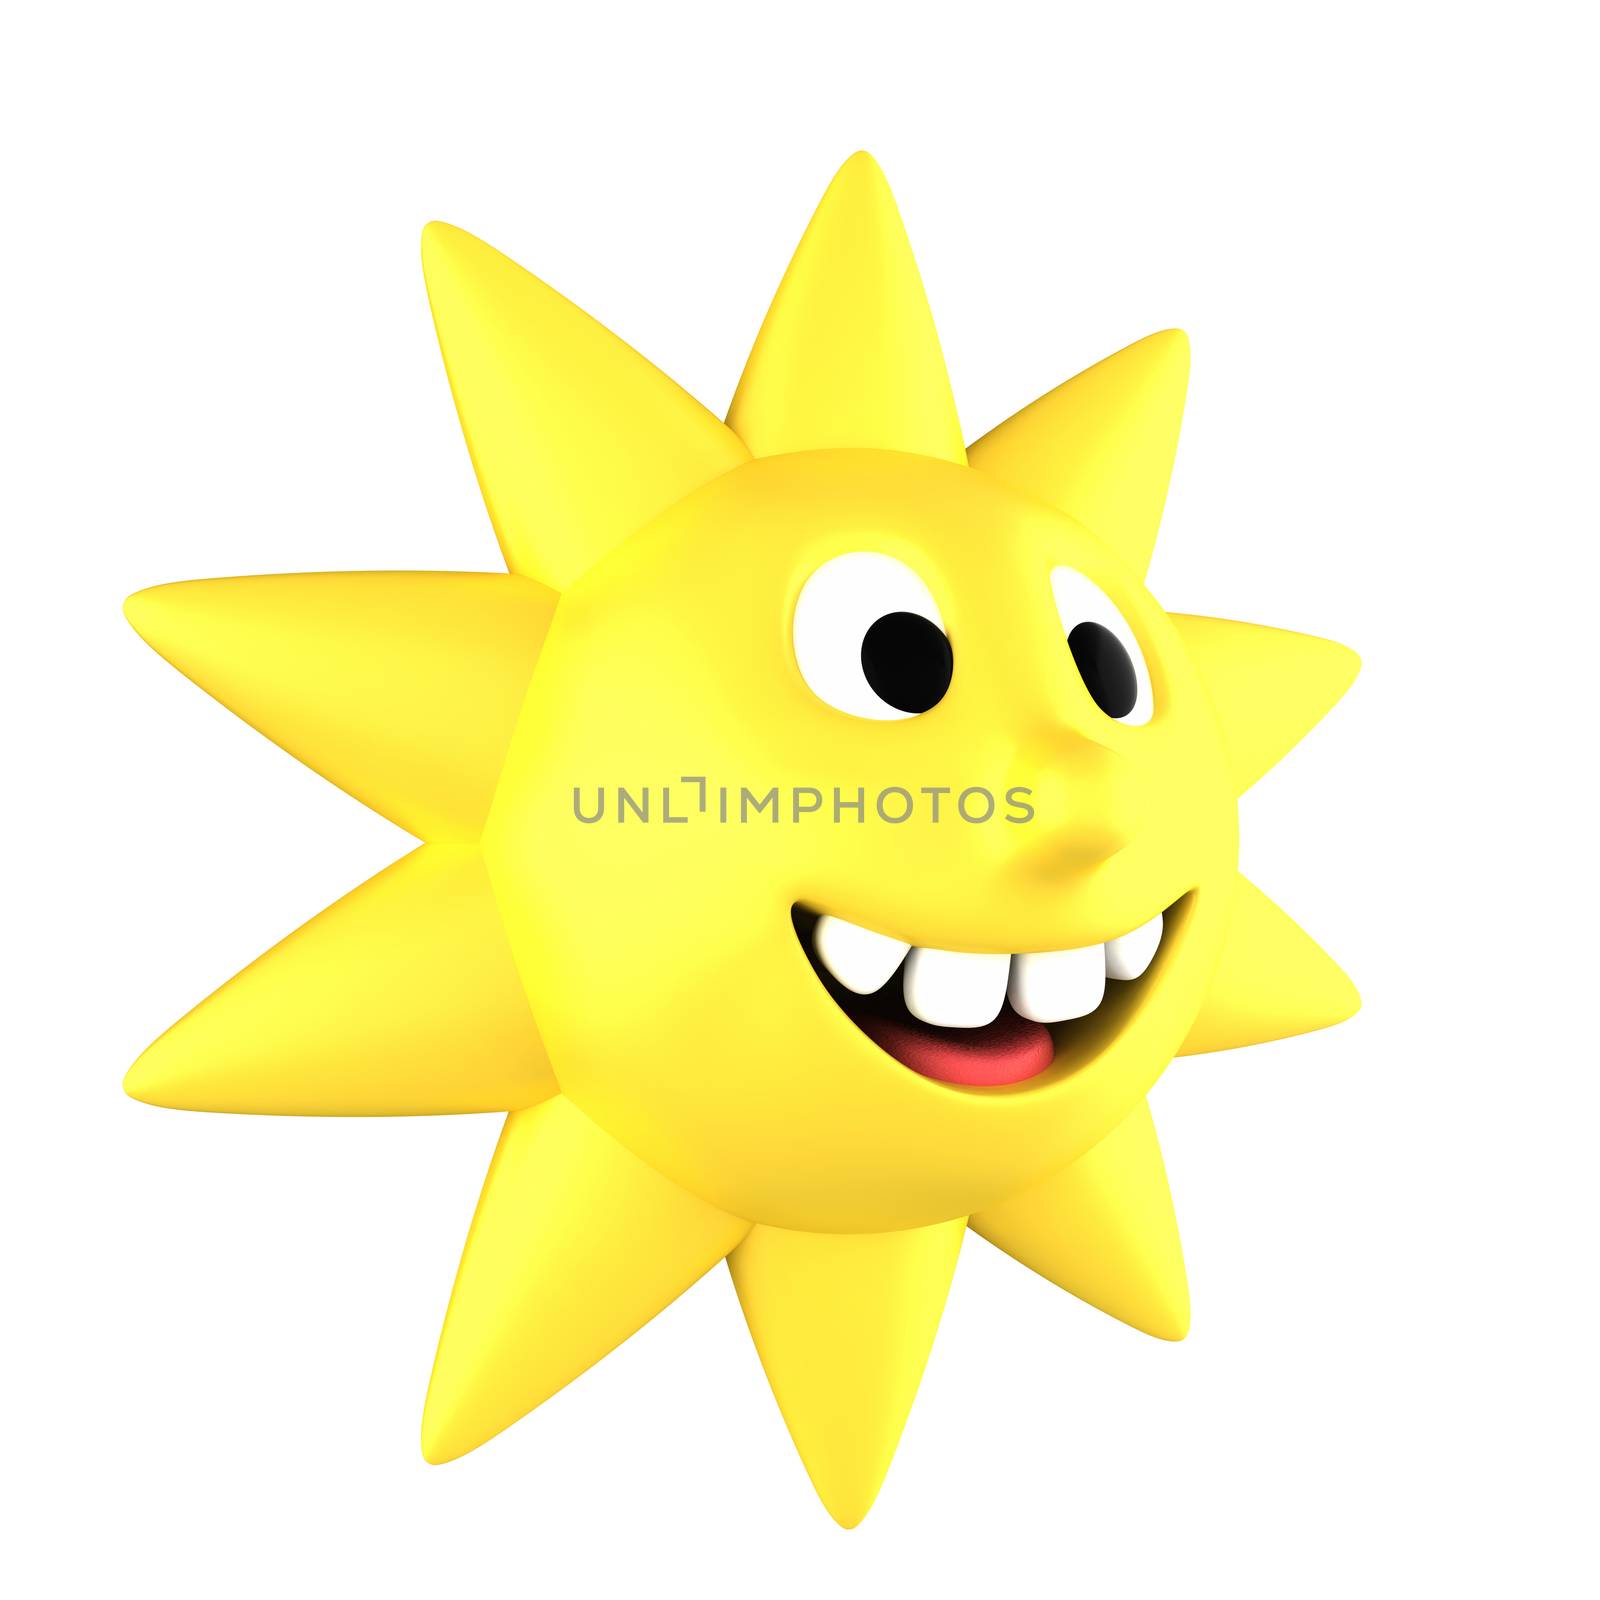 Yellow sun smiling showing teeth turned sideways, isolated on white background